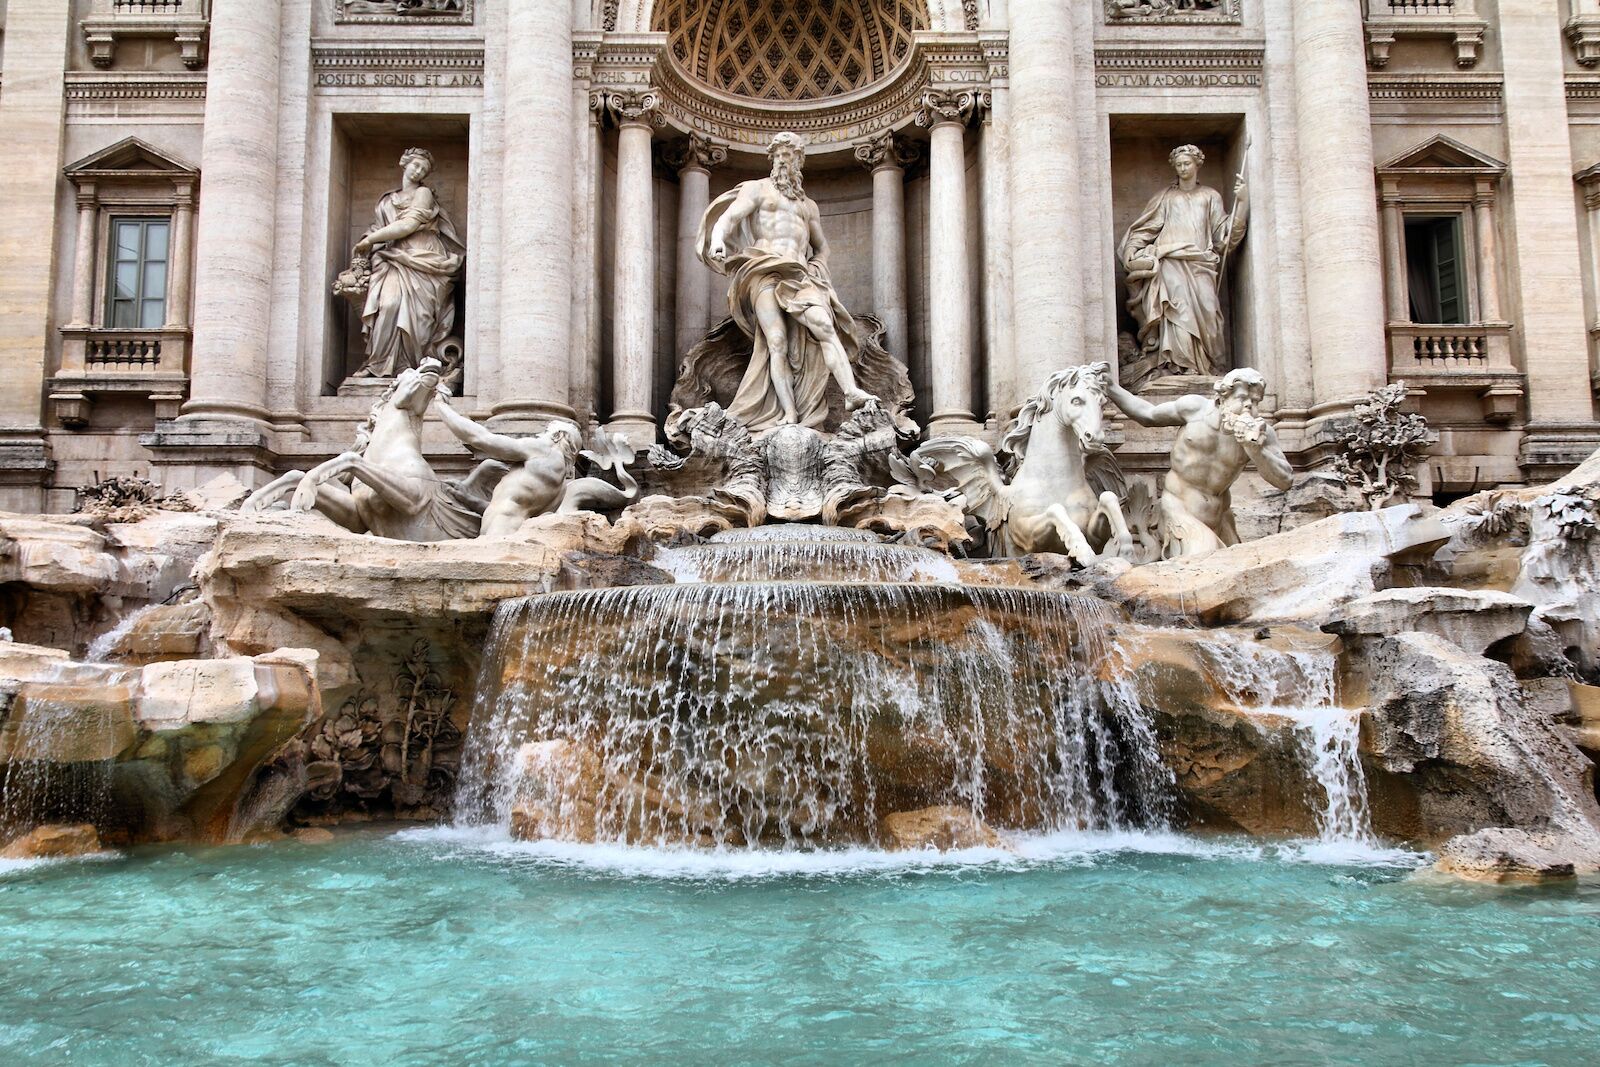 The characters sculpted on the Trevi Fountain in Rome